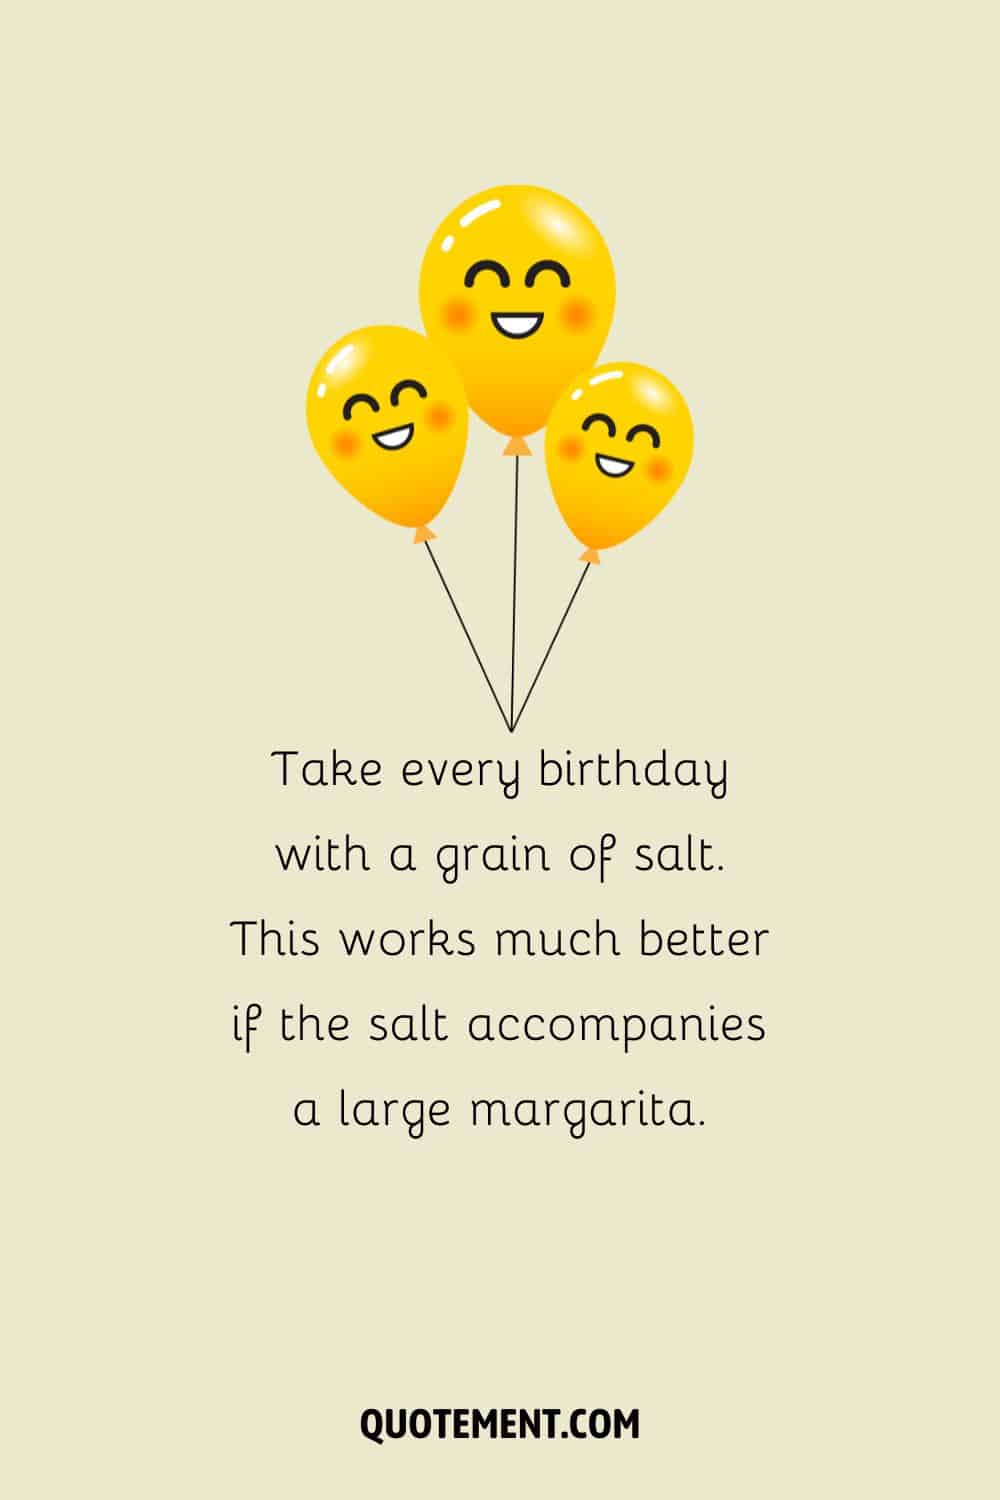 Take every birthday with a grain of salt